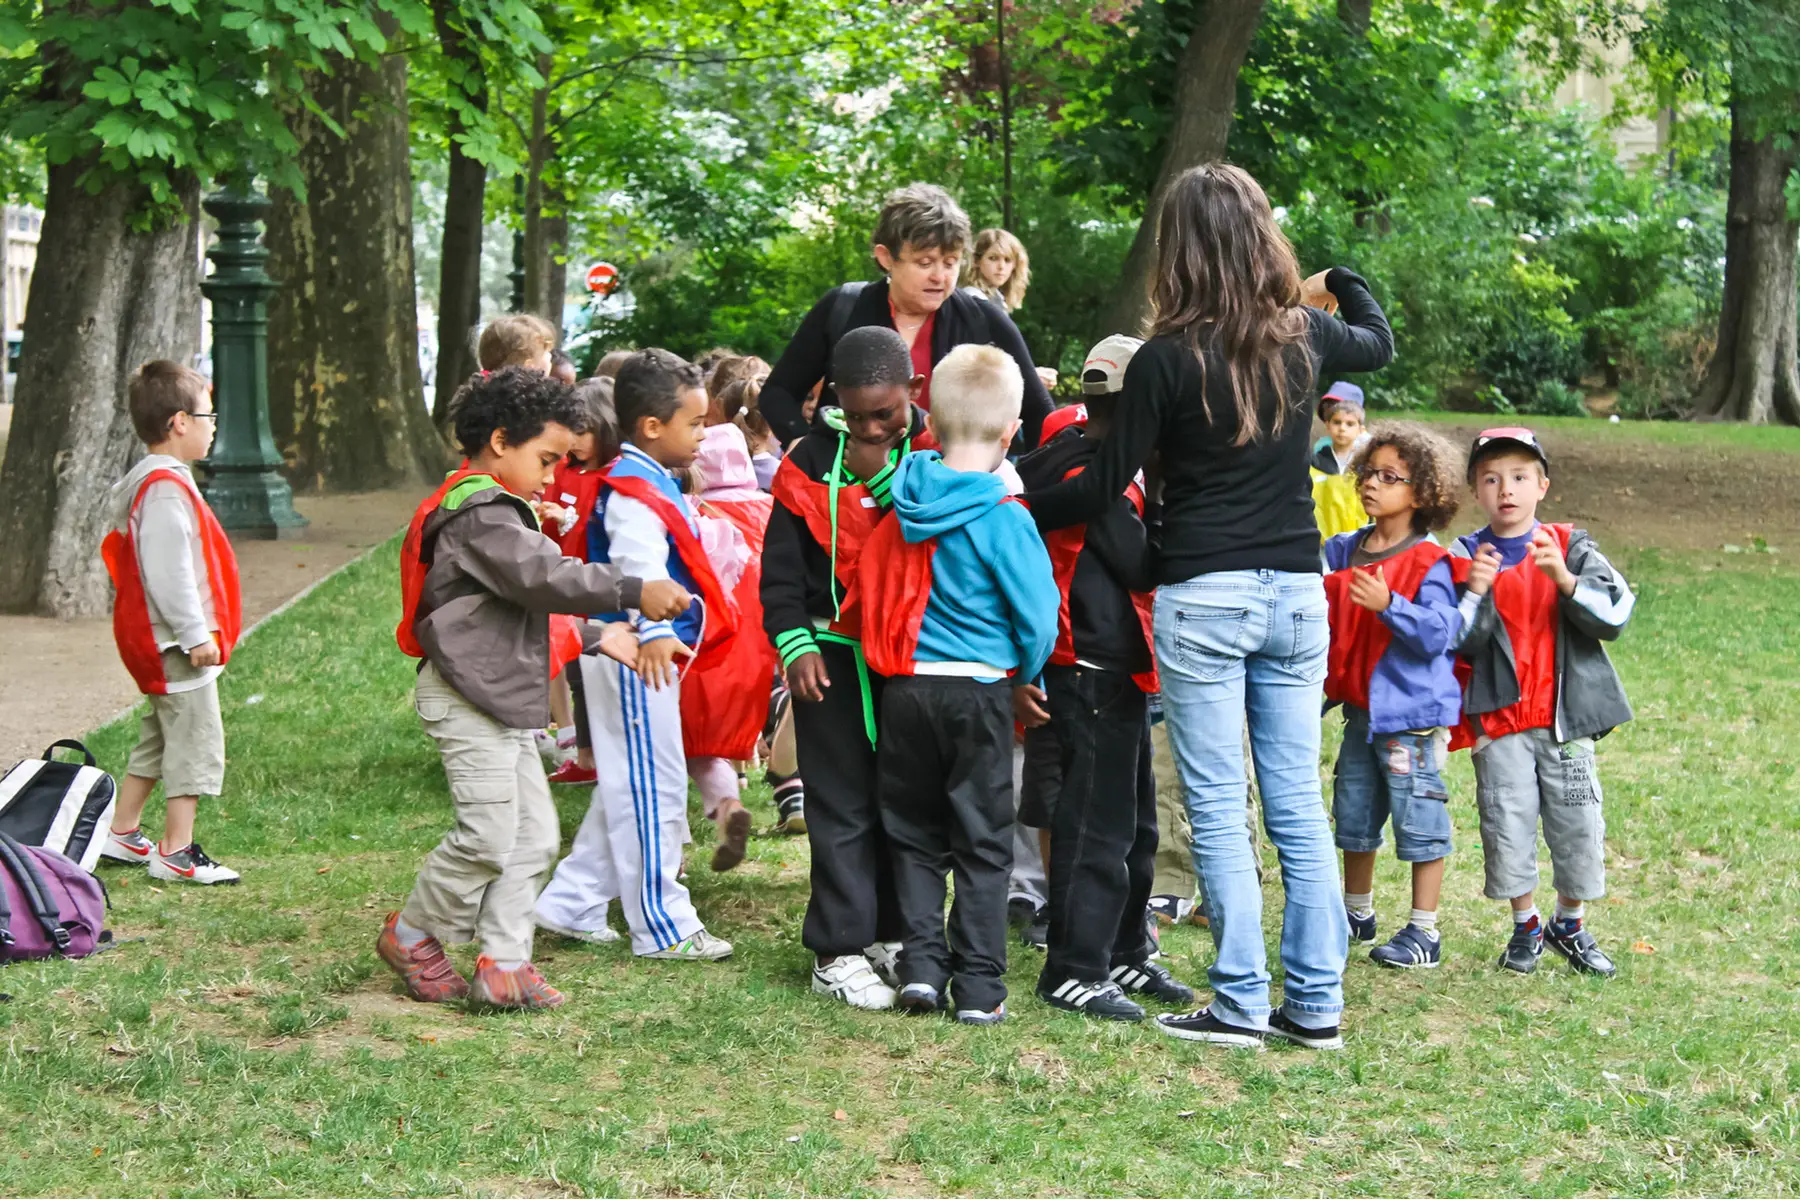 French schoolgroup in a park with their teacher